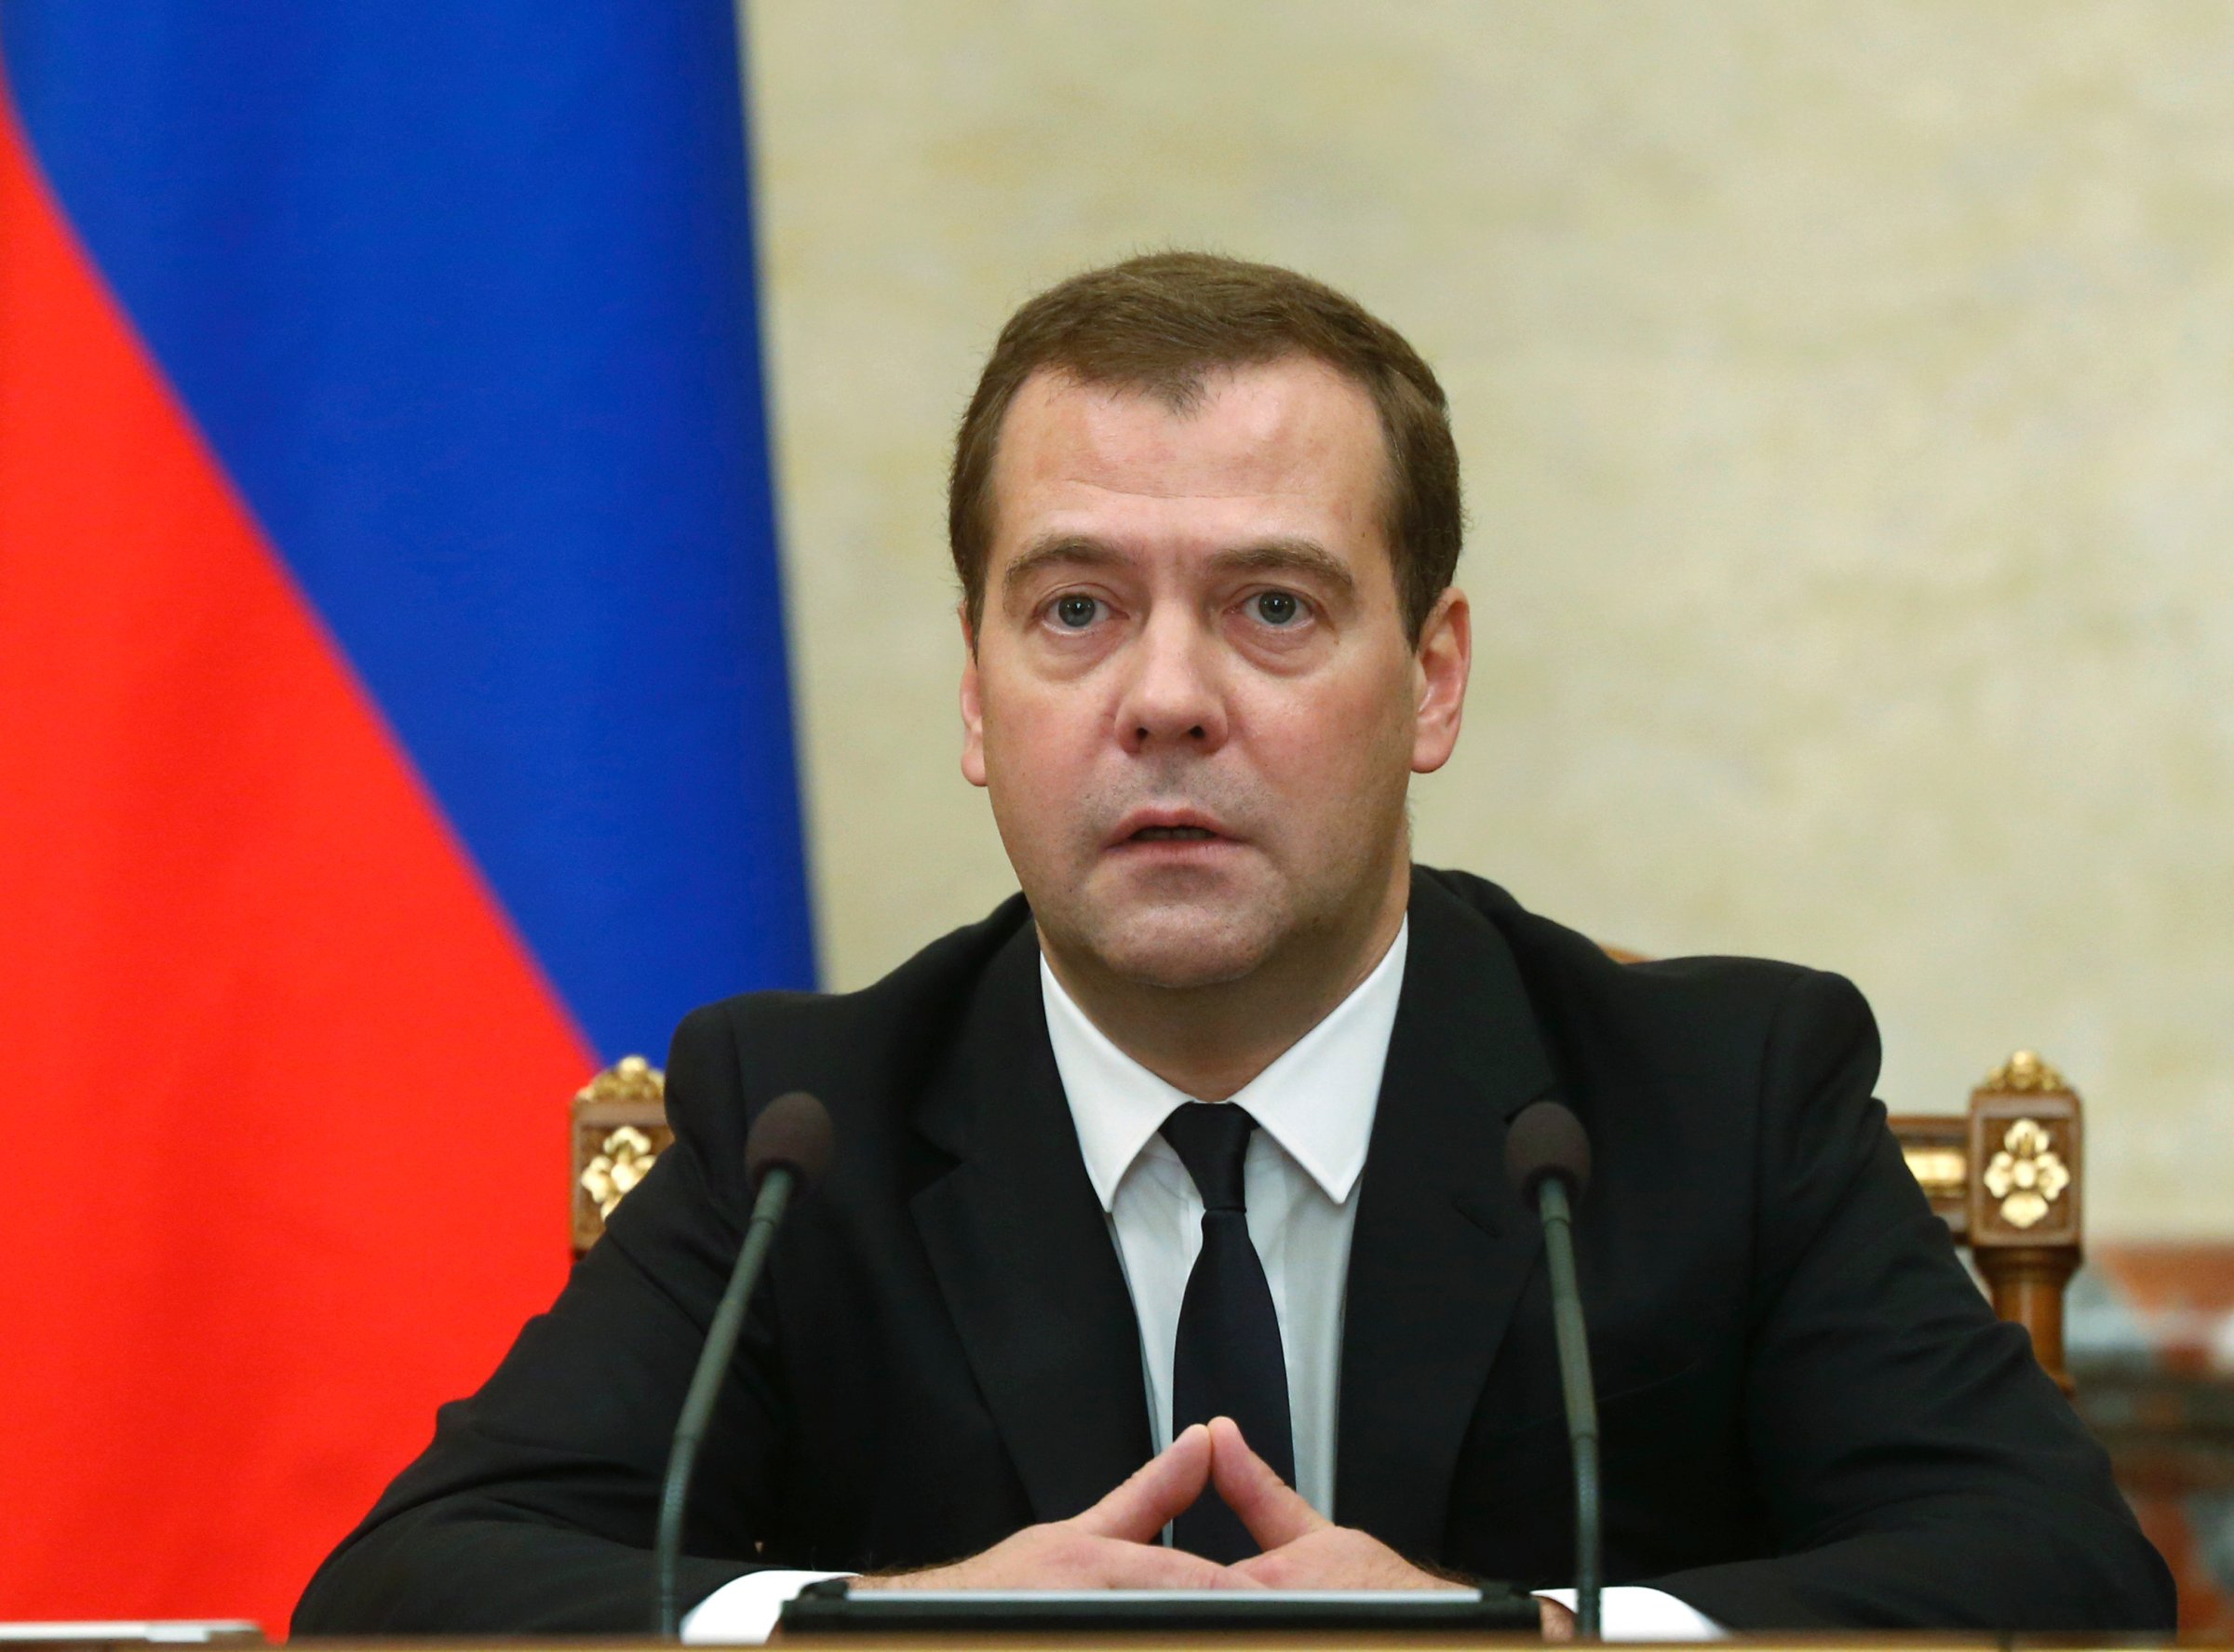 Russian Premier Dmitry Medvedev announces sanctions at the Cabinet meeting in Moscow on Thursday, Aug. 7.